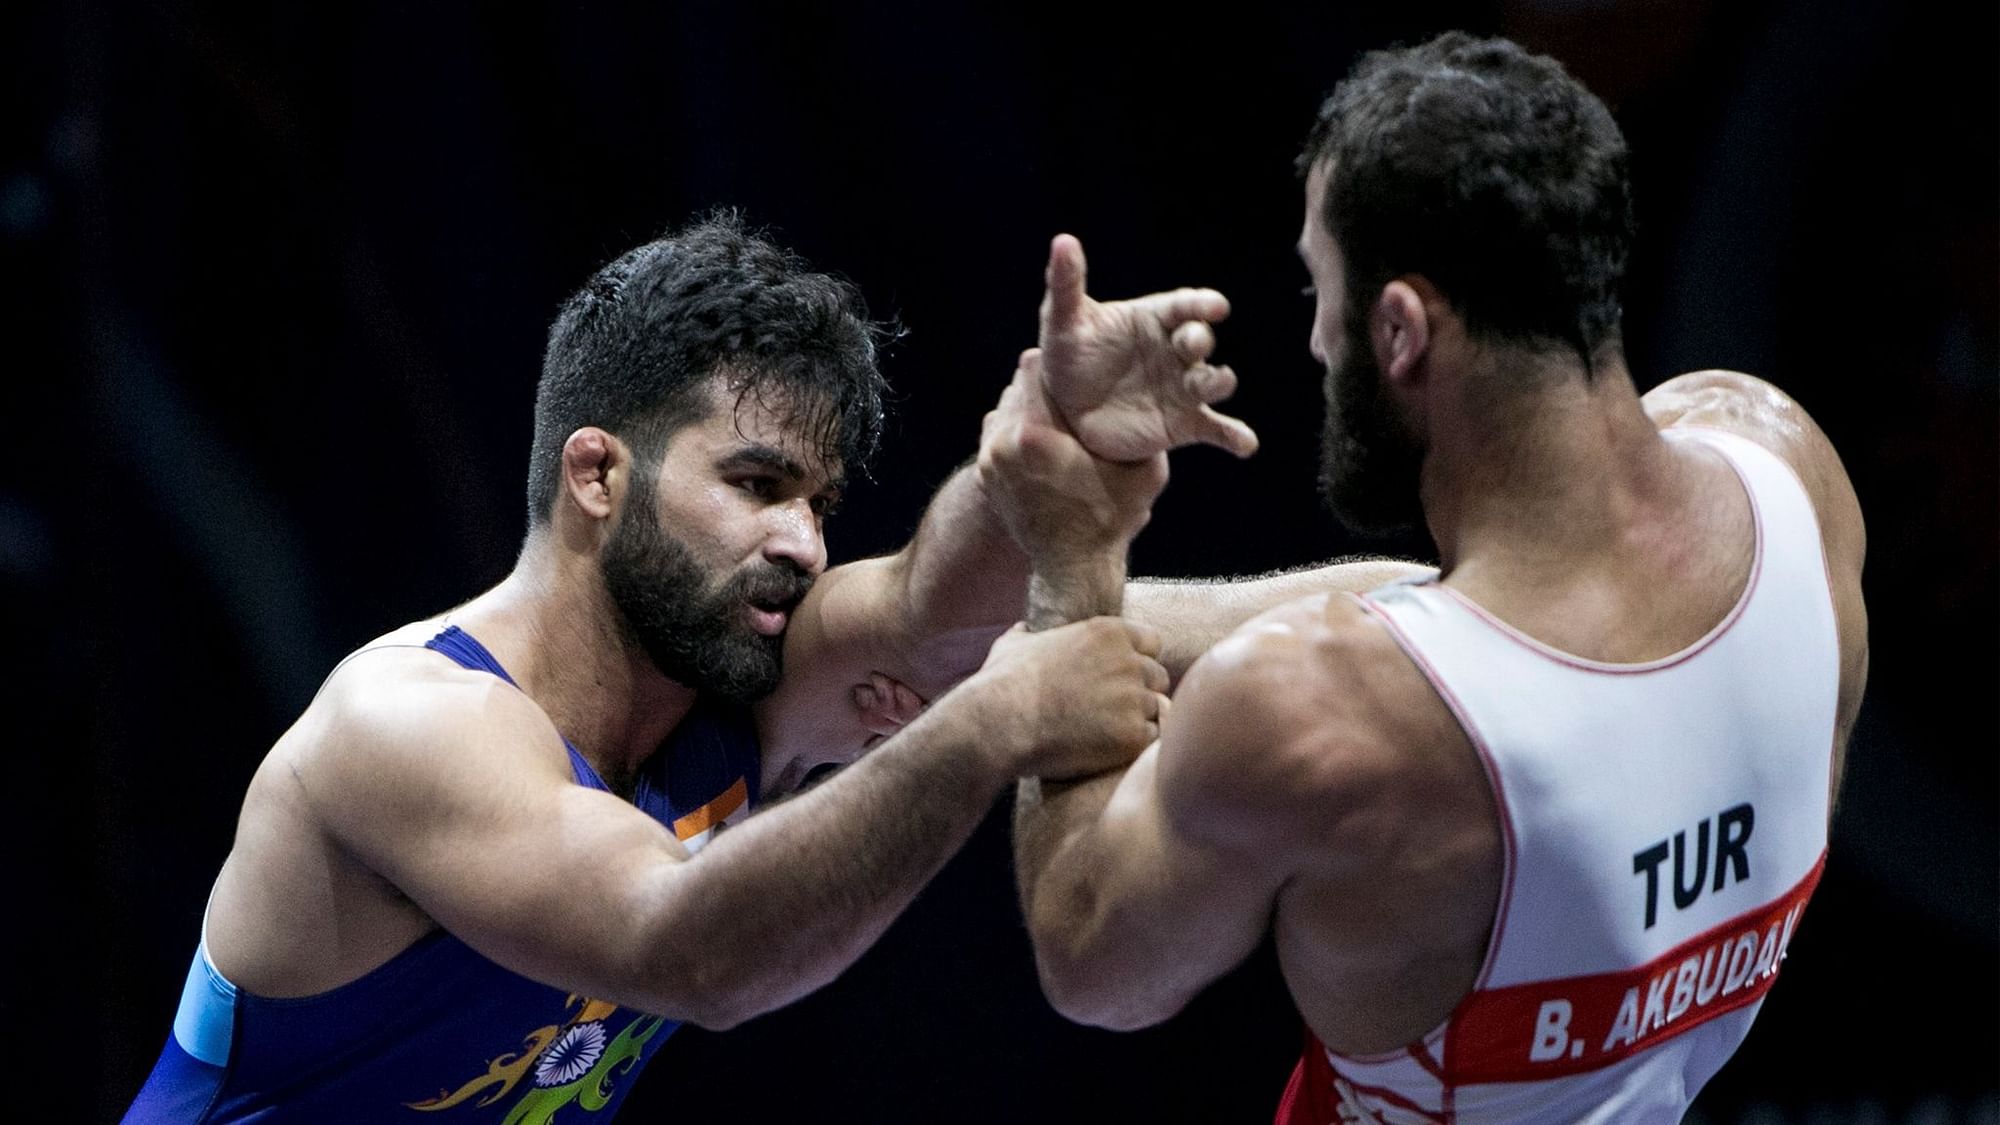 Wrestling Championships 2019 Live Streaming on WrestlingTV Where to Watch Indian Wrestlers in Action and World Wrestling Championships 2019, Day 3 Schedule